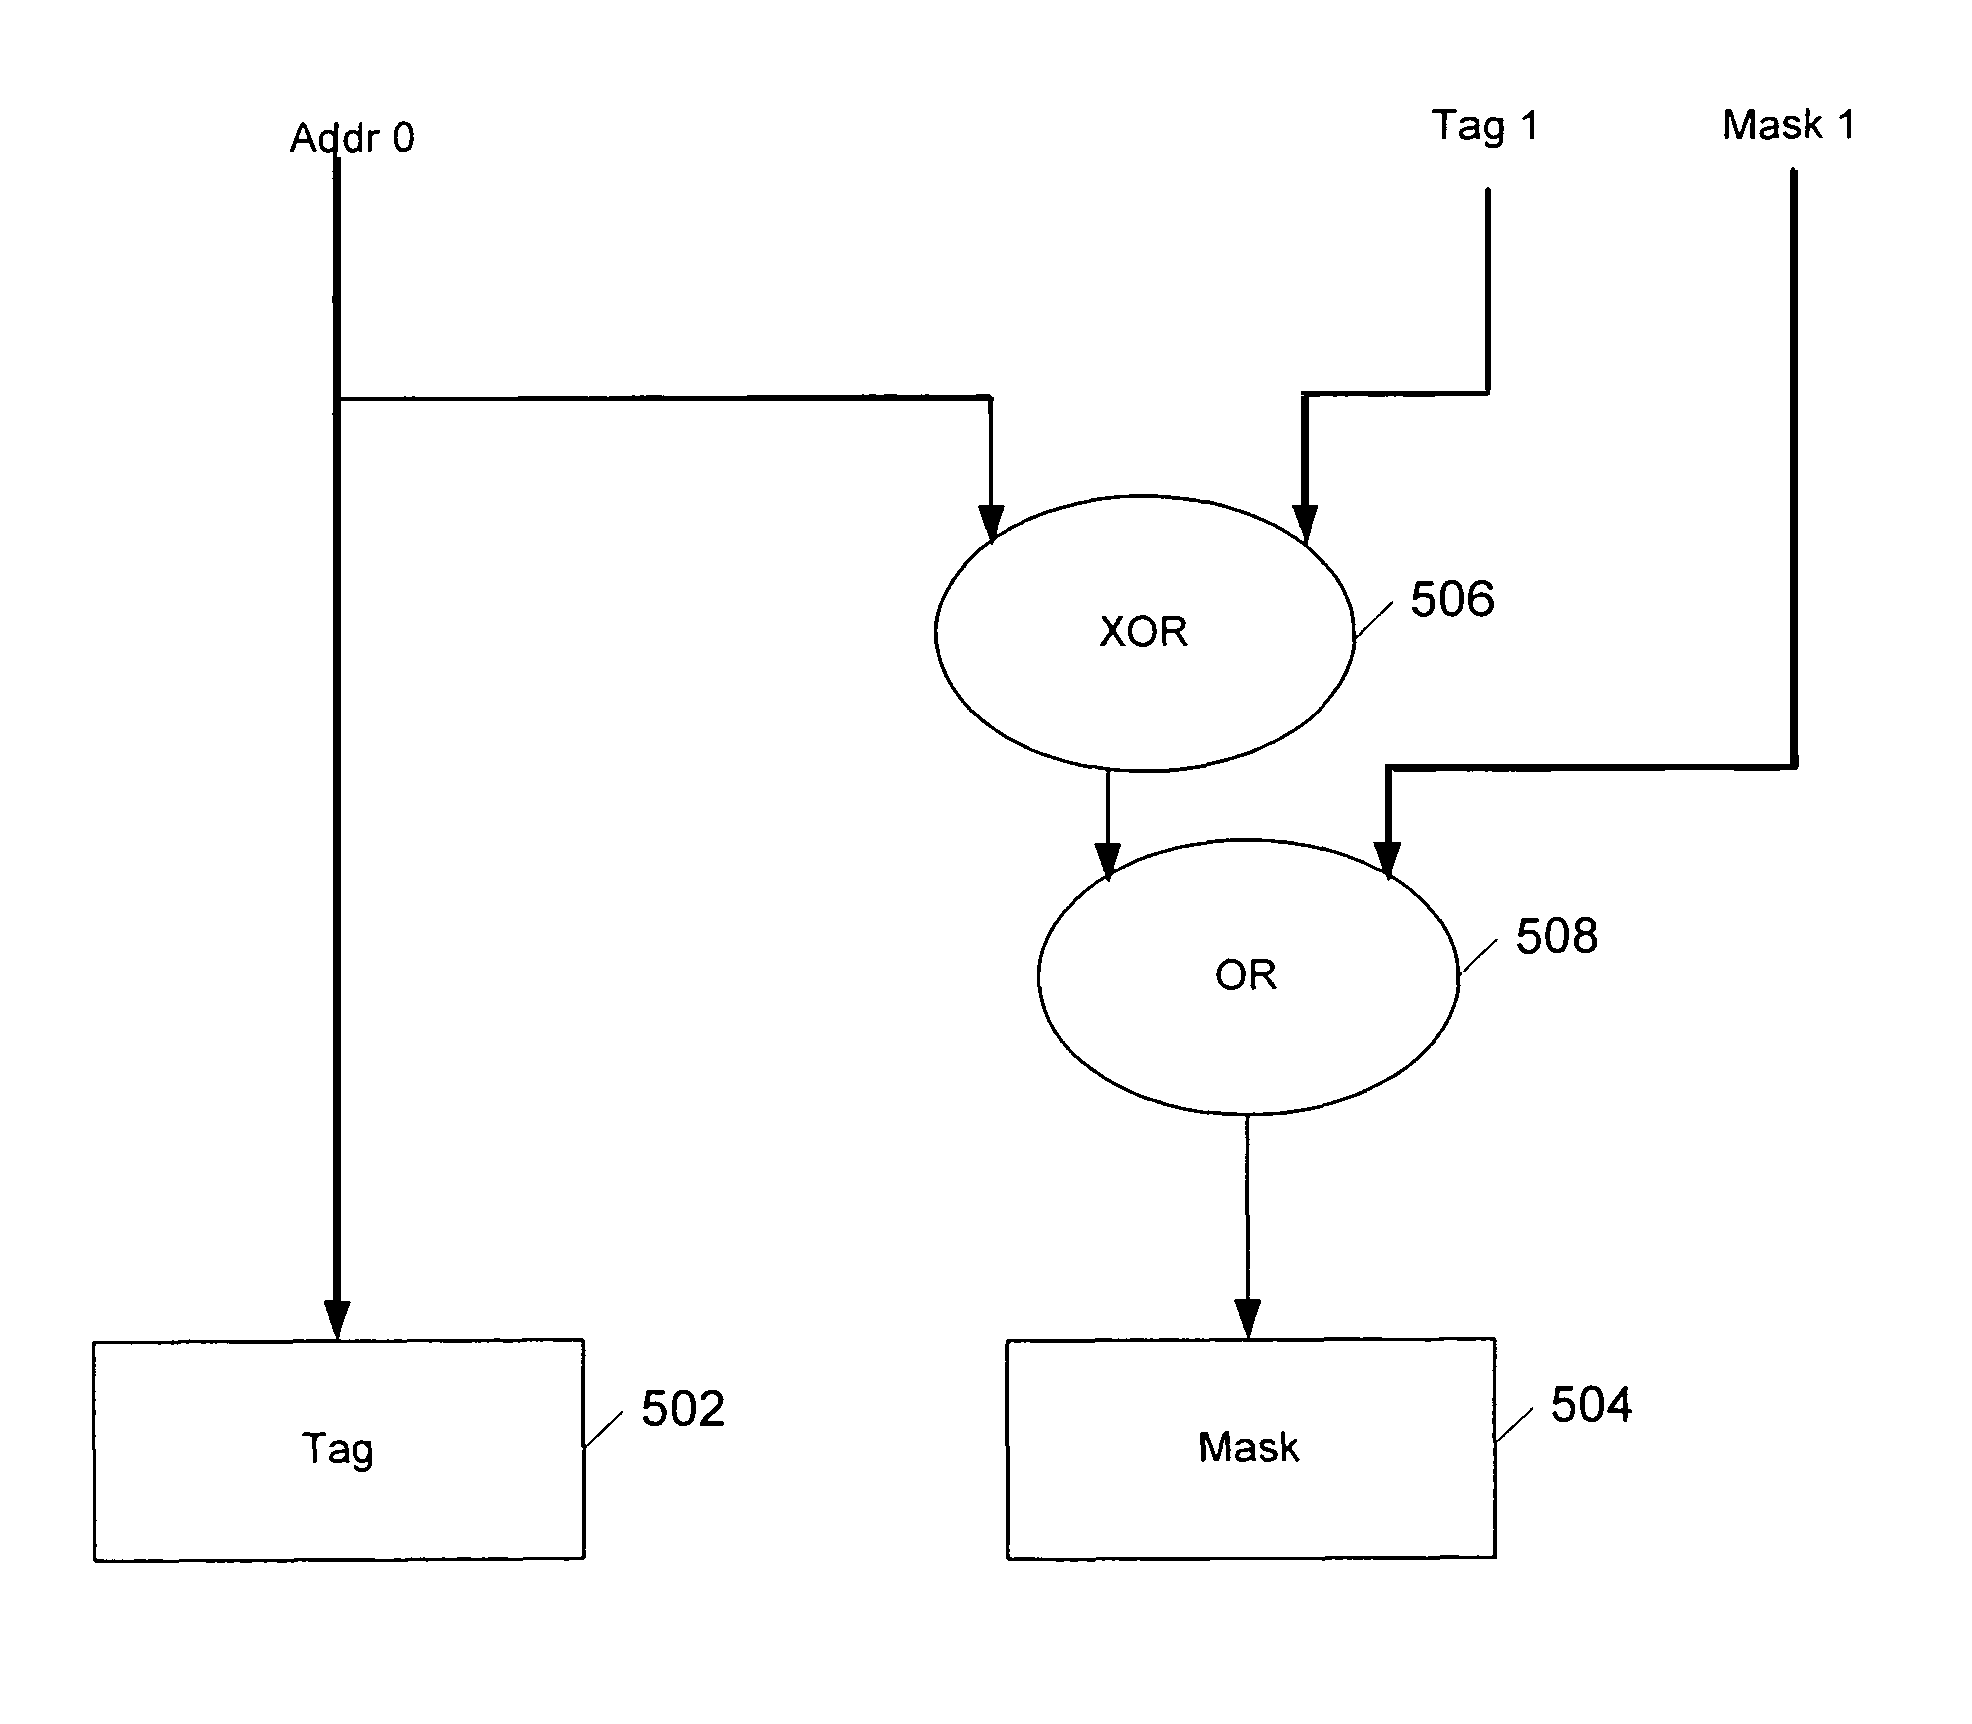 Maintaining memory coherency with a trace cache